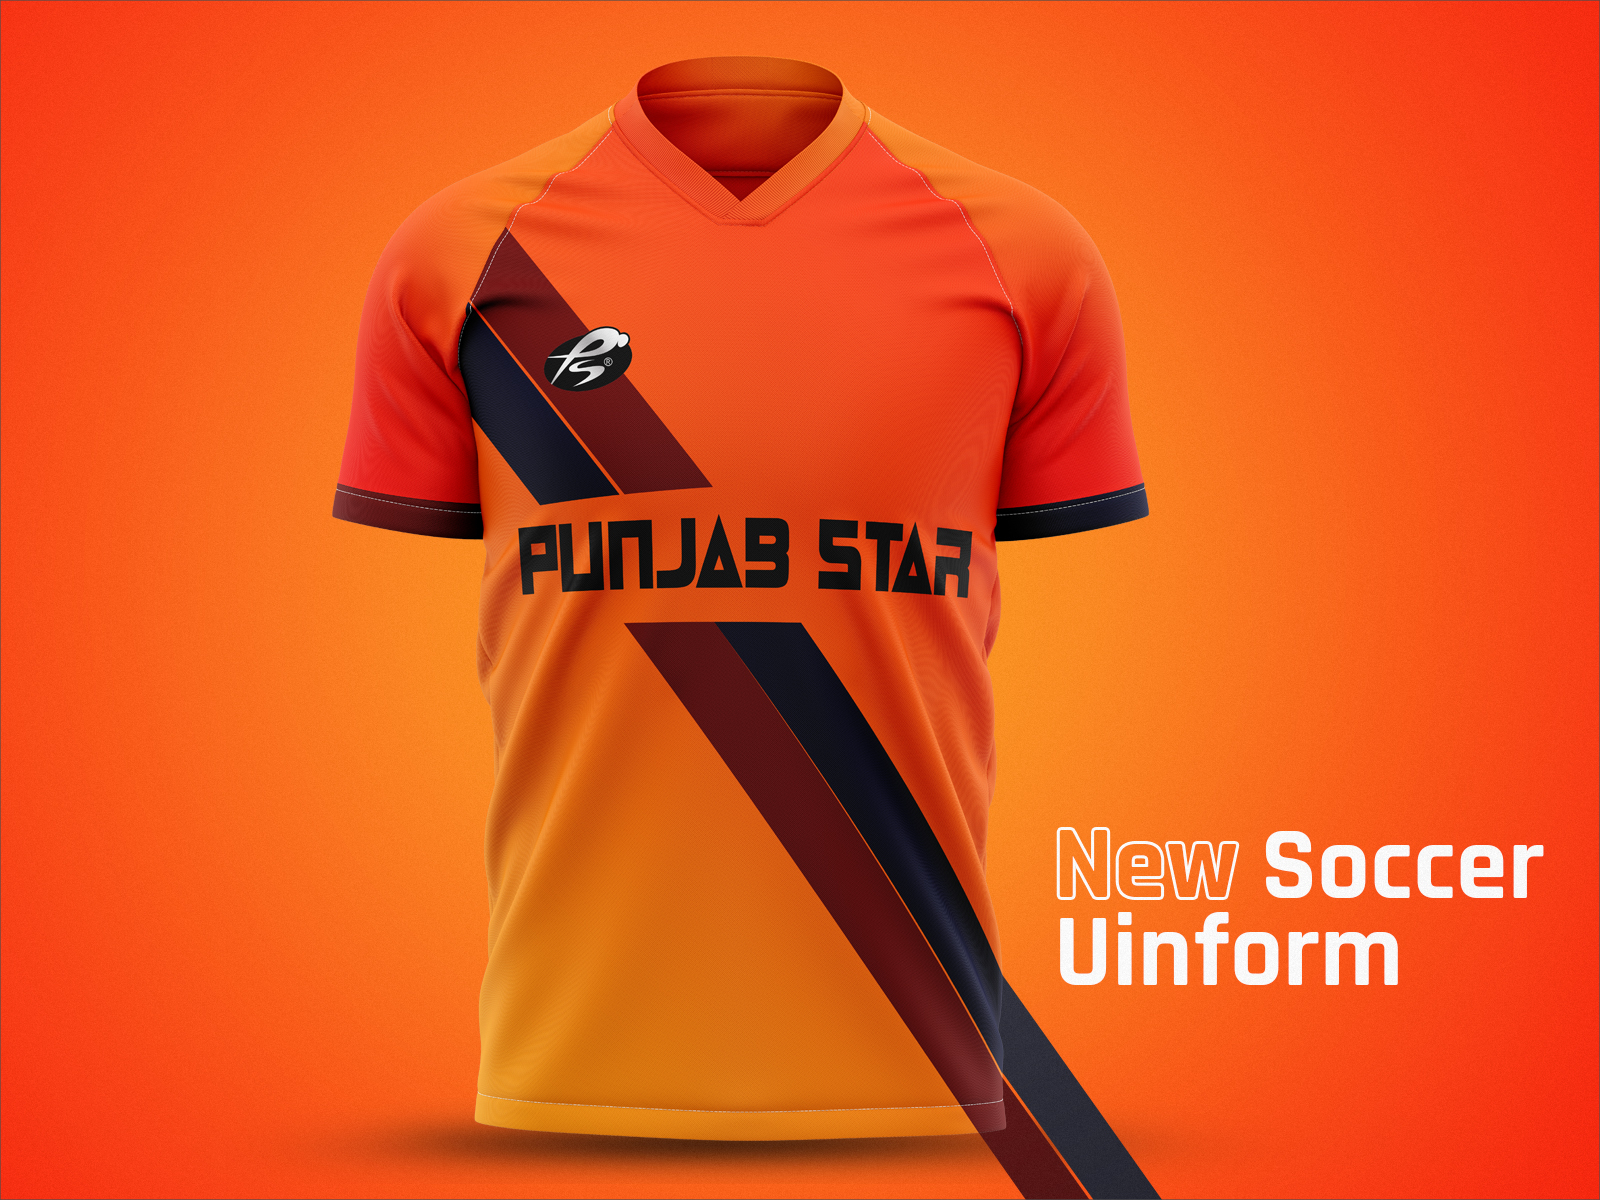 New Soccer Uniform Free Download by Imran on Dribbble